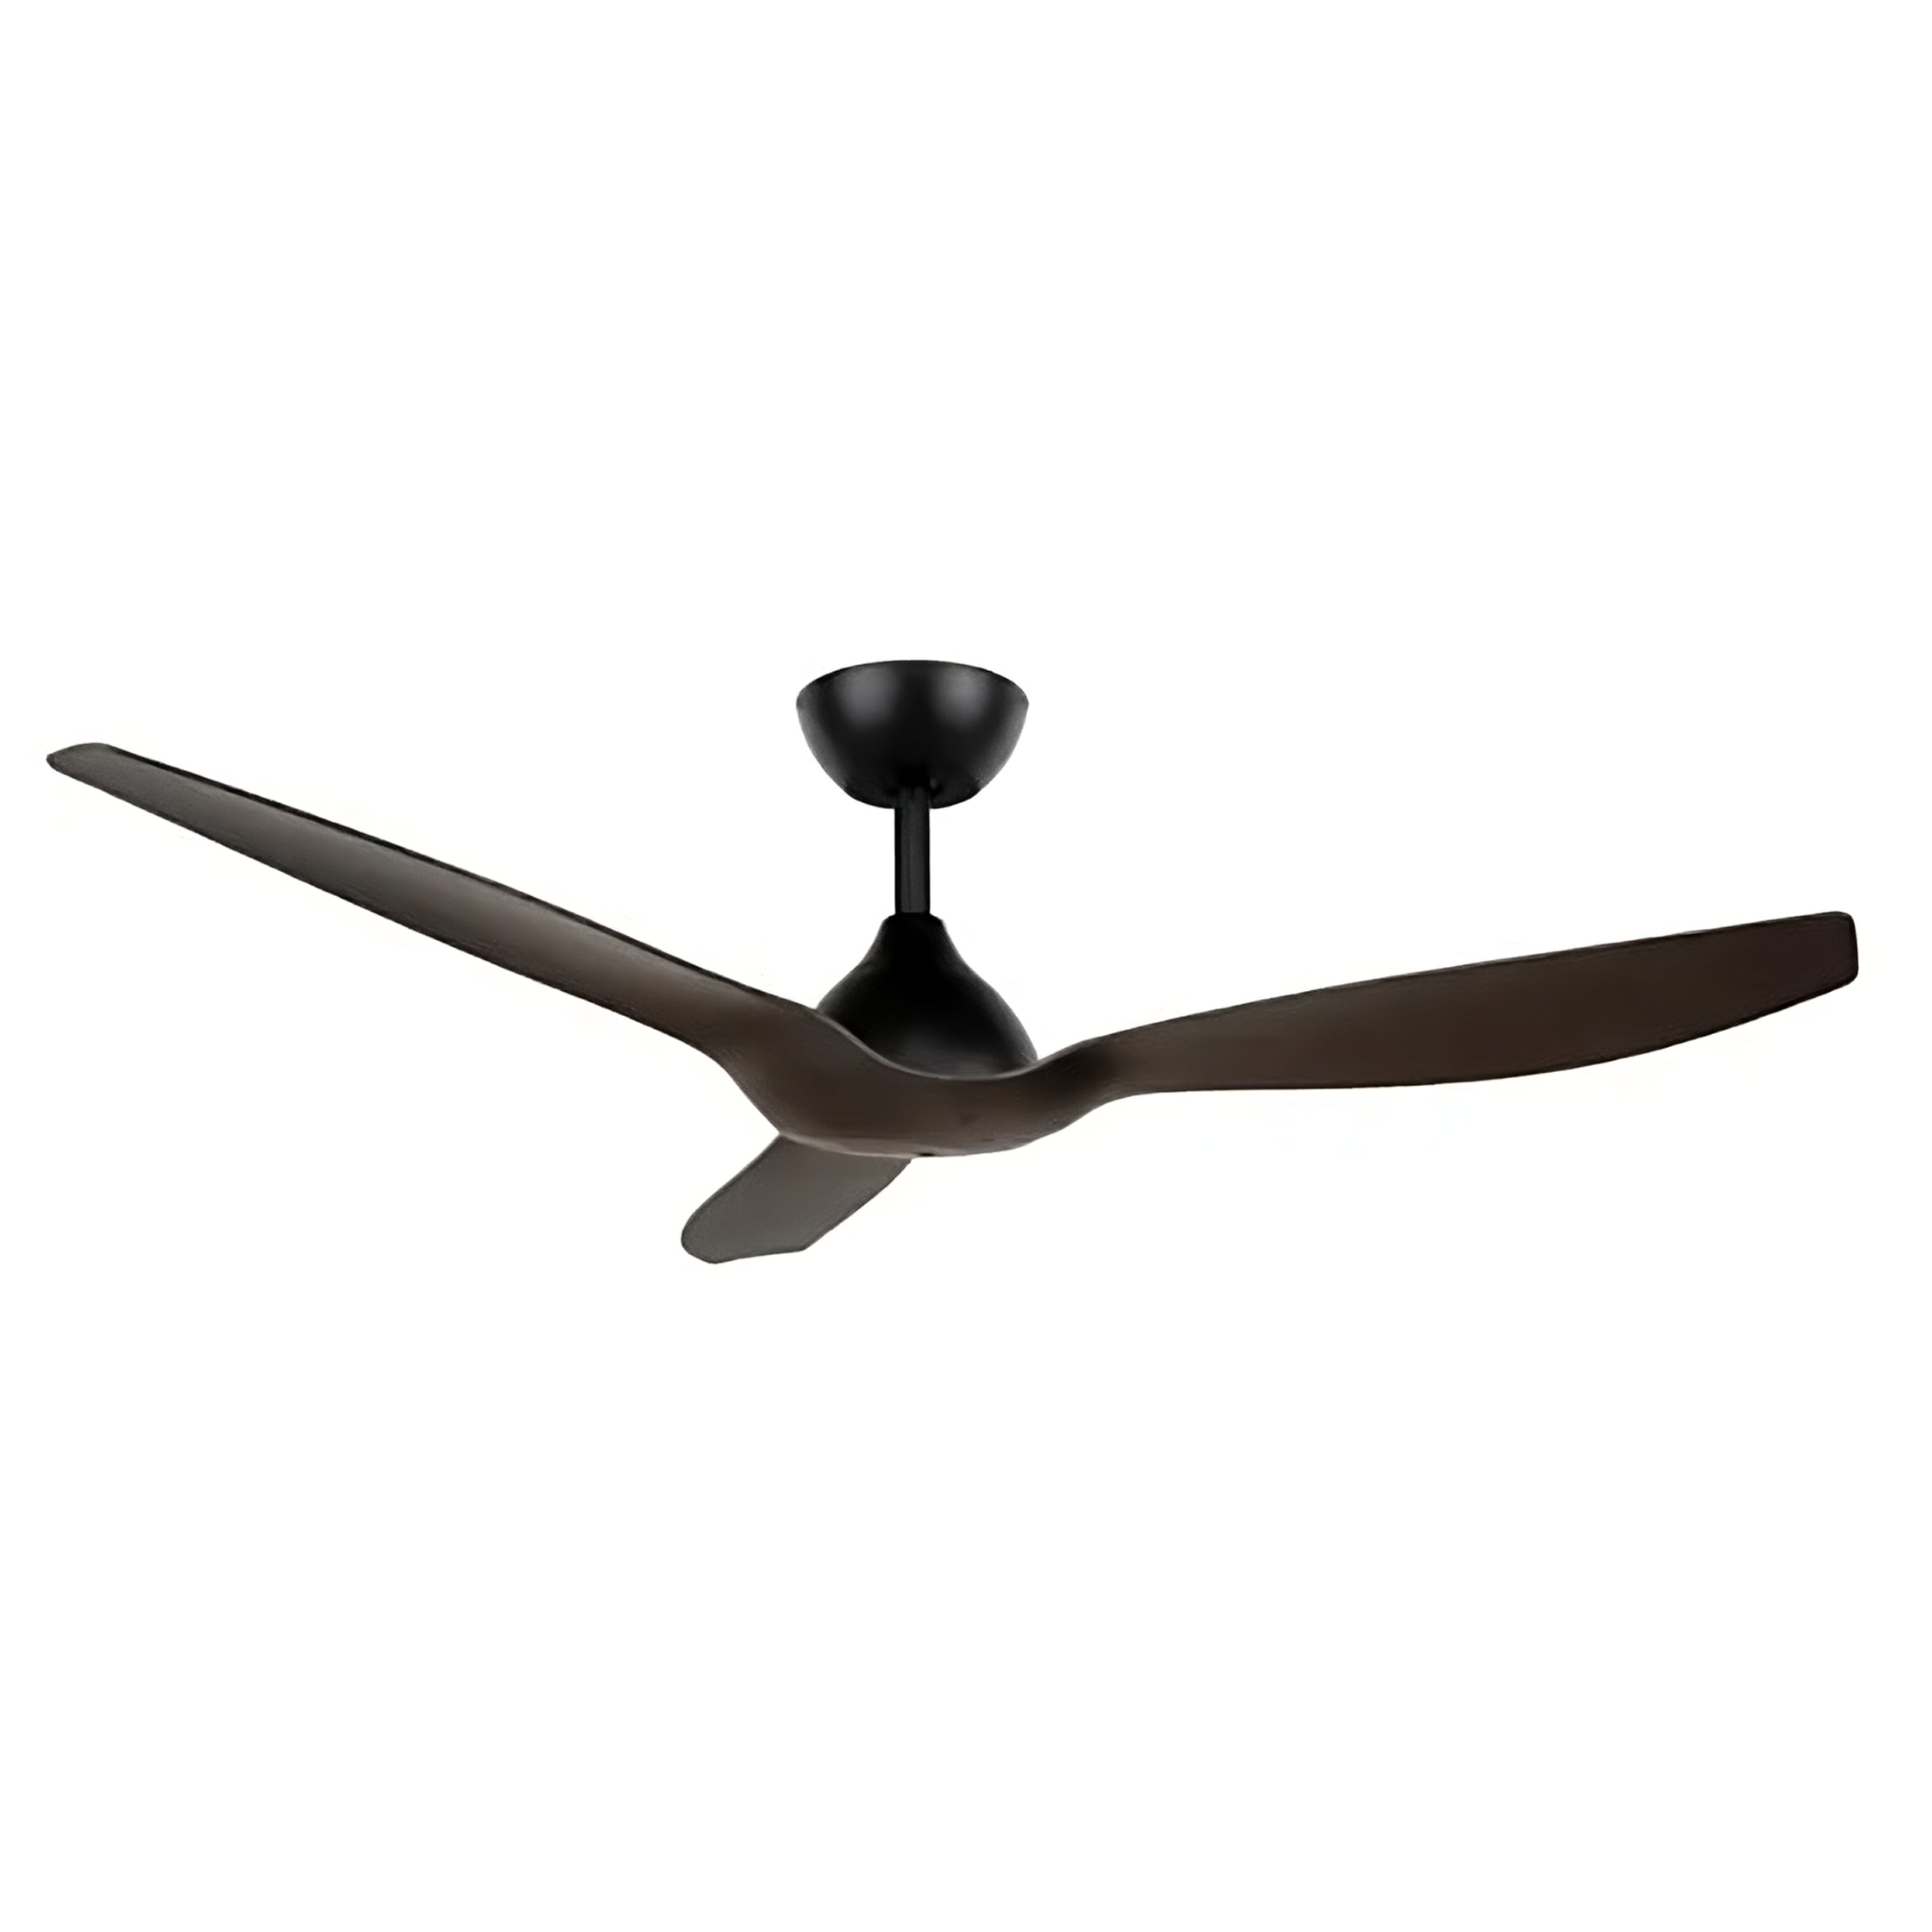 Product image of Durban 58 inch DC Ceiling Fan for Living Rooms Black with Walnut Wood Blades